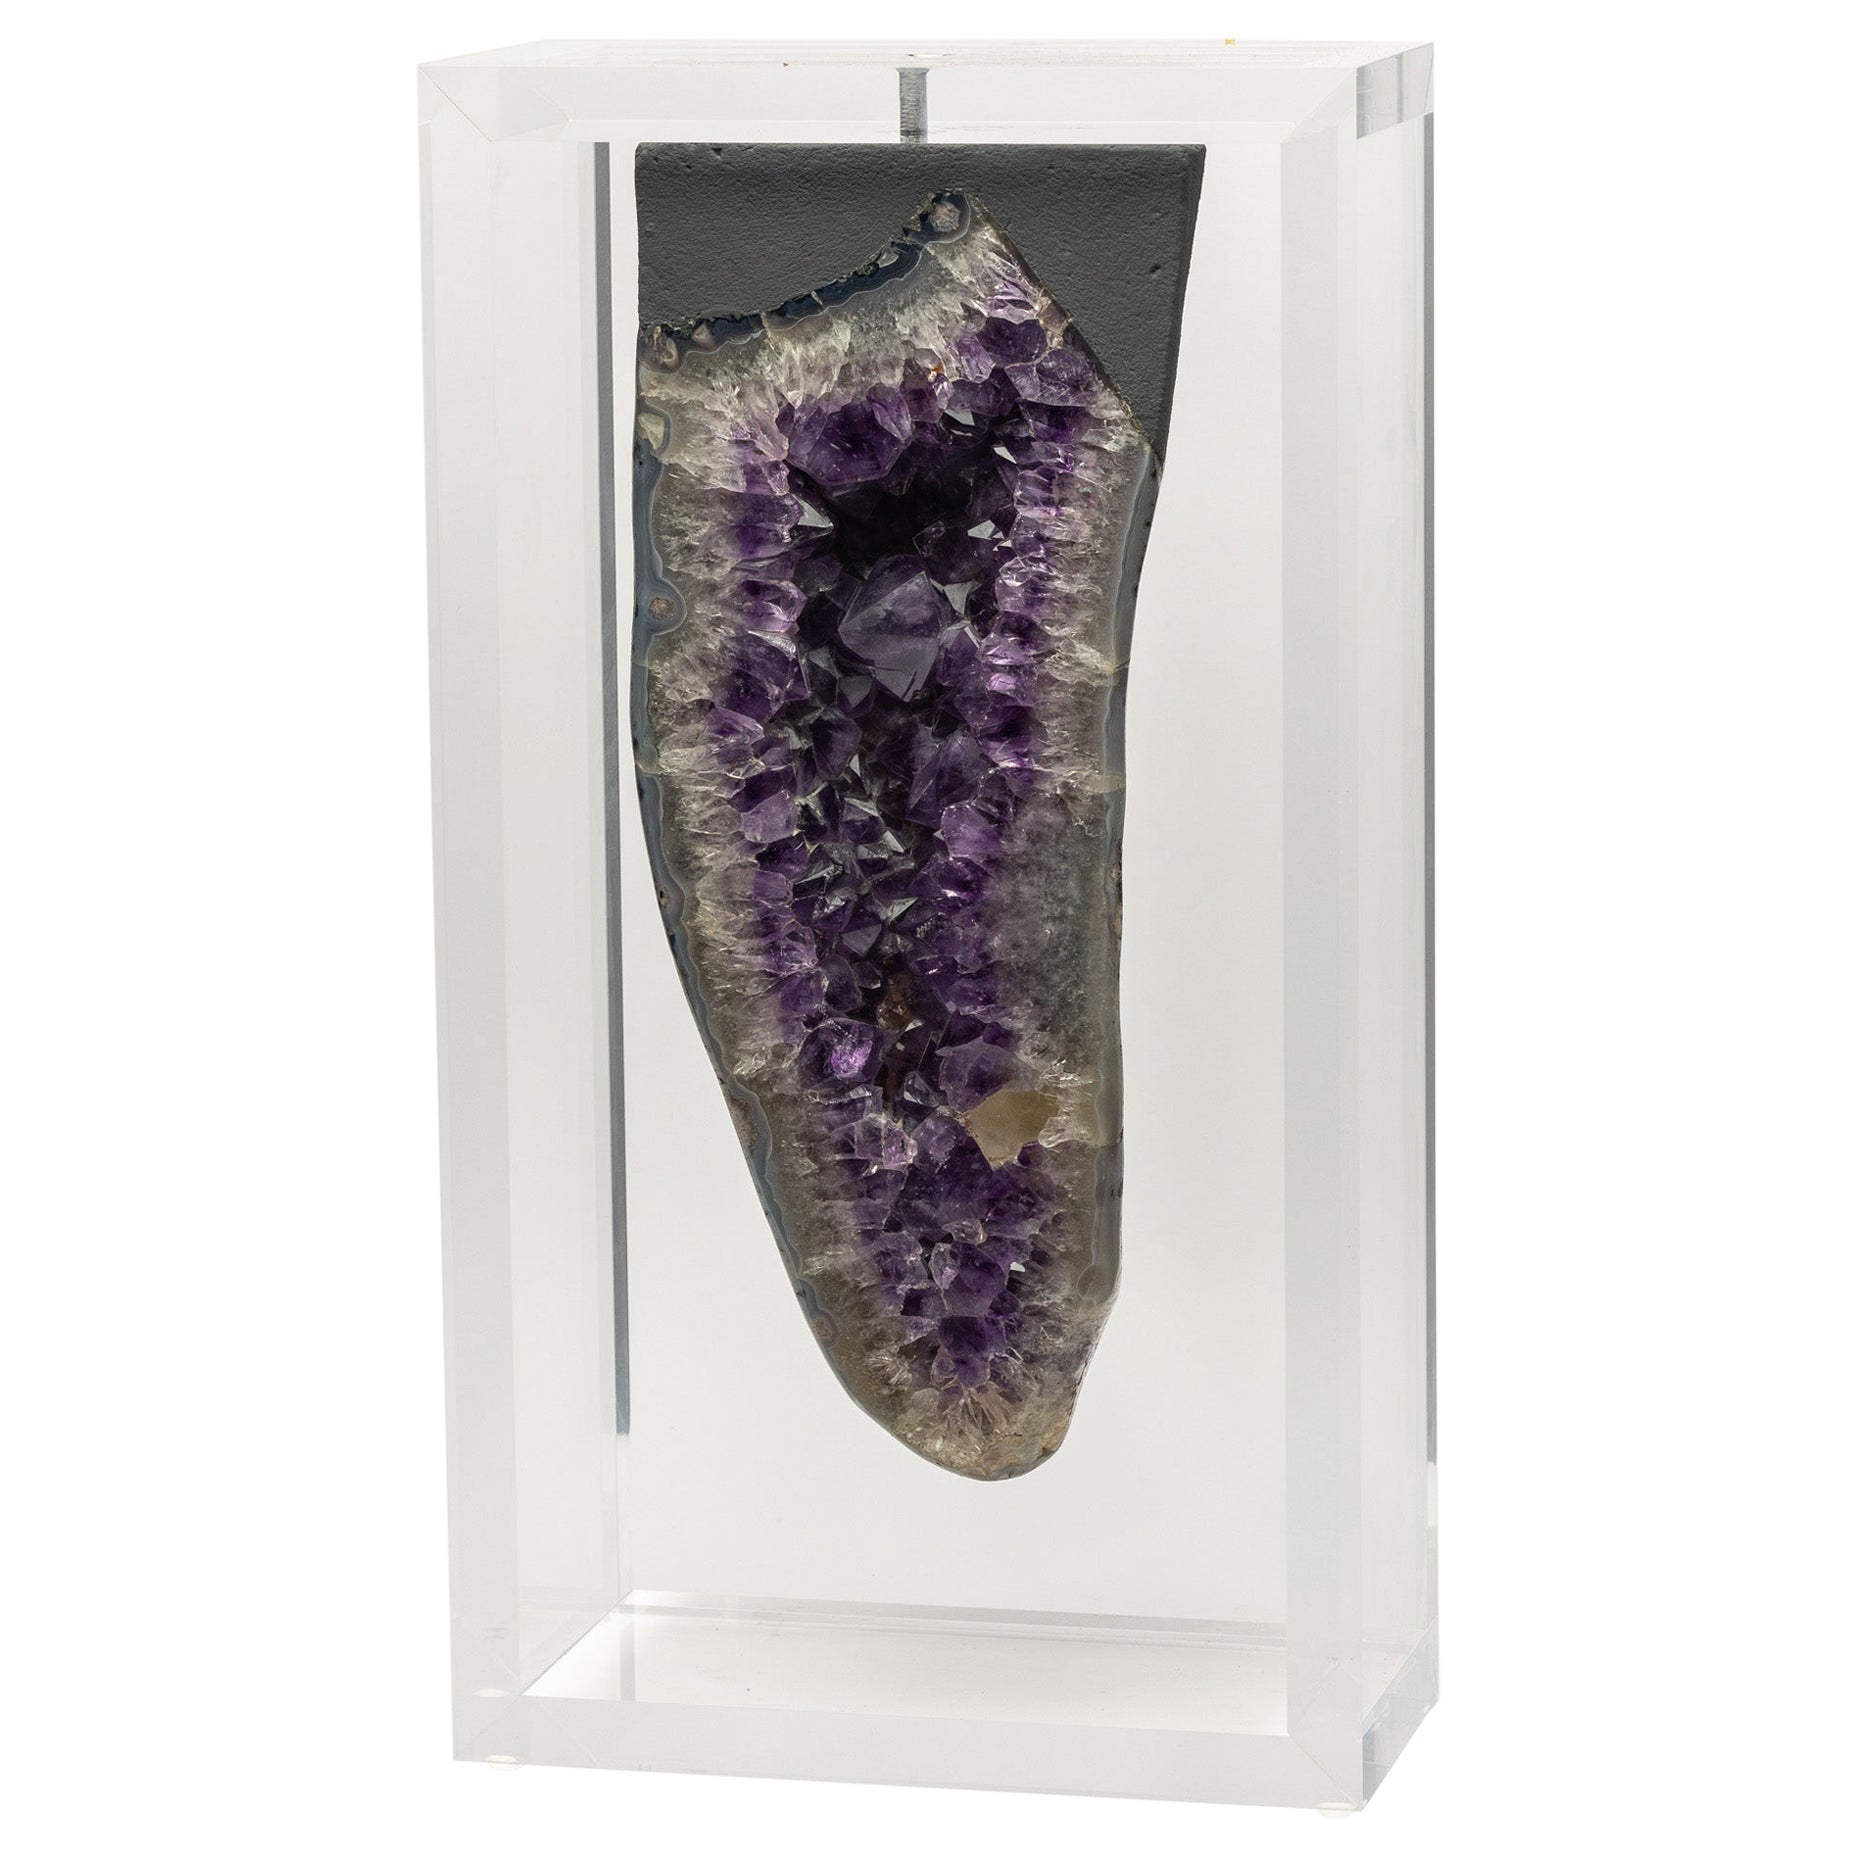 Brazilian Amethyst Cathedrals mounted in original design acrylic base